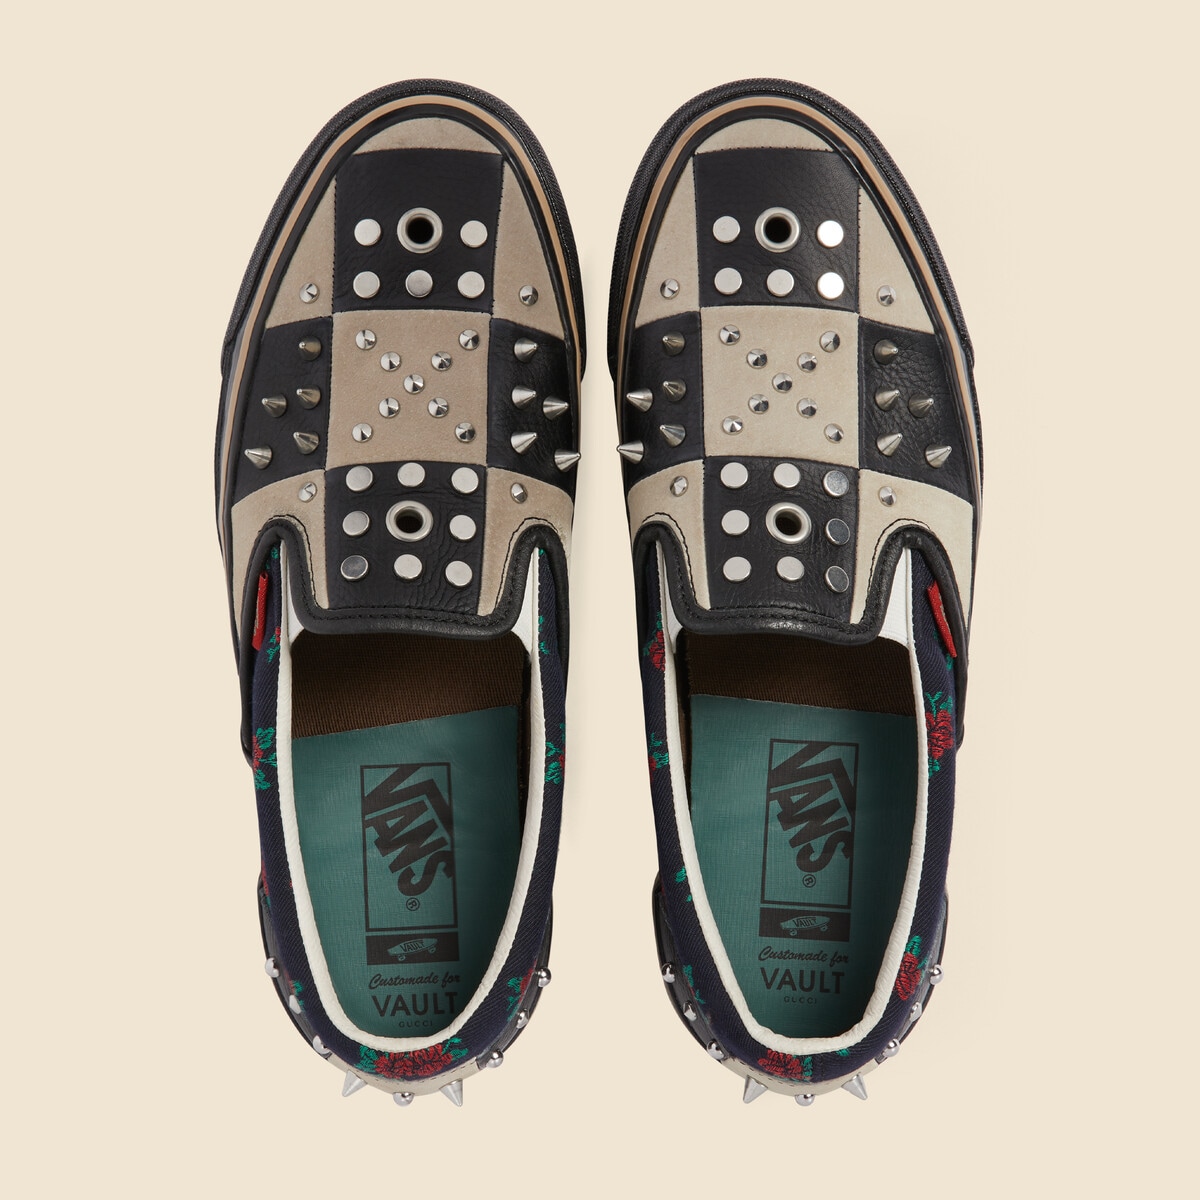 Gucci and Vans Team Up on Studded Patchwork Sneaker Collaboration –  Footwear News